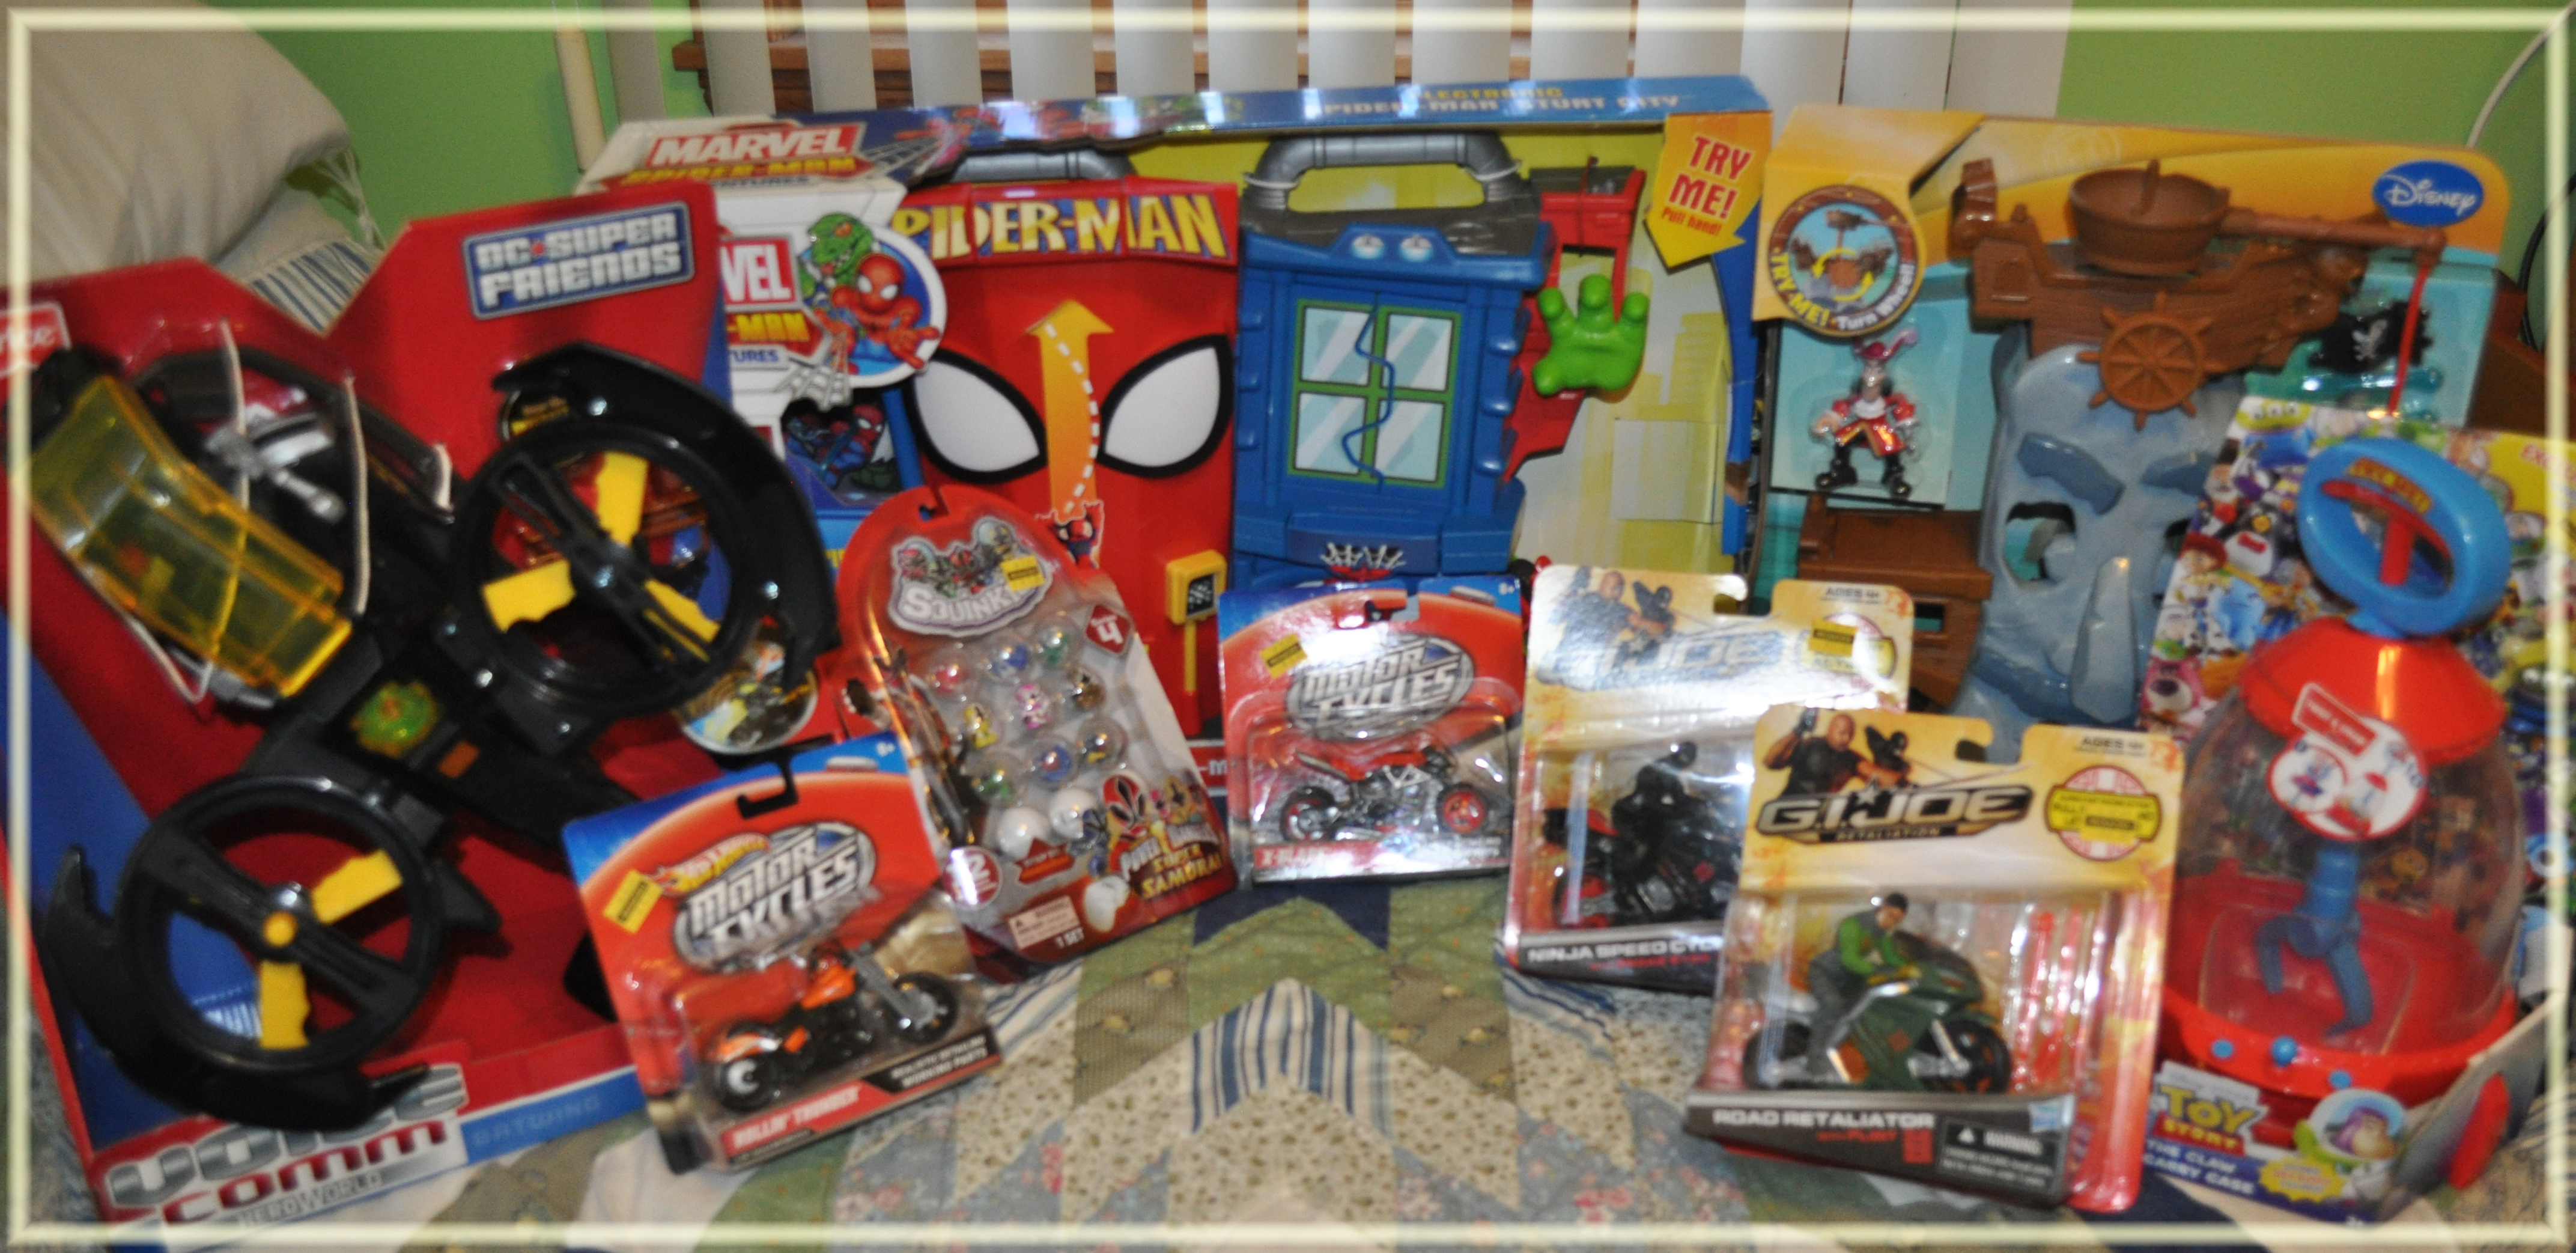 Kmart Additional 50% off Clearance Toys! Great Buys! - Mommy's